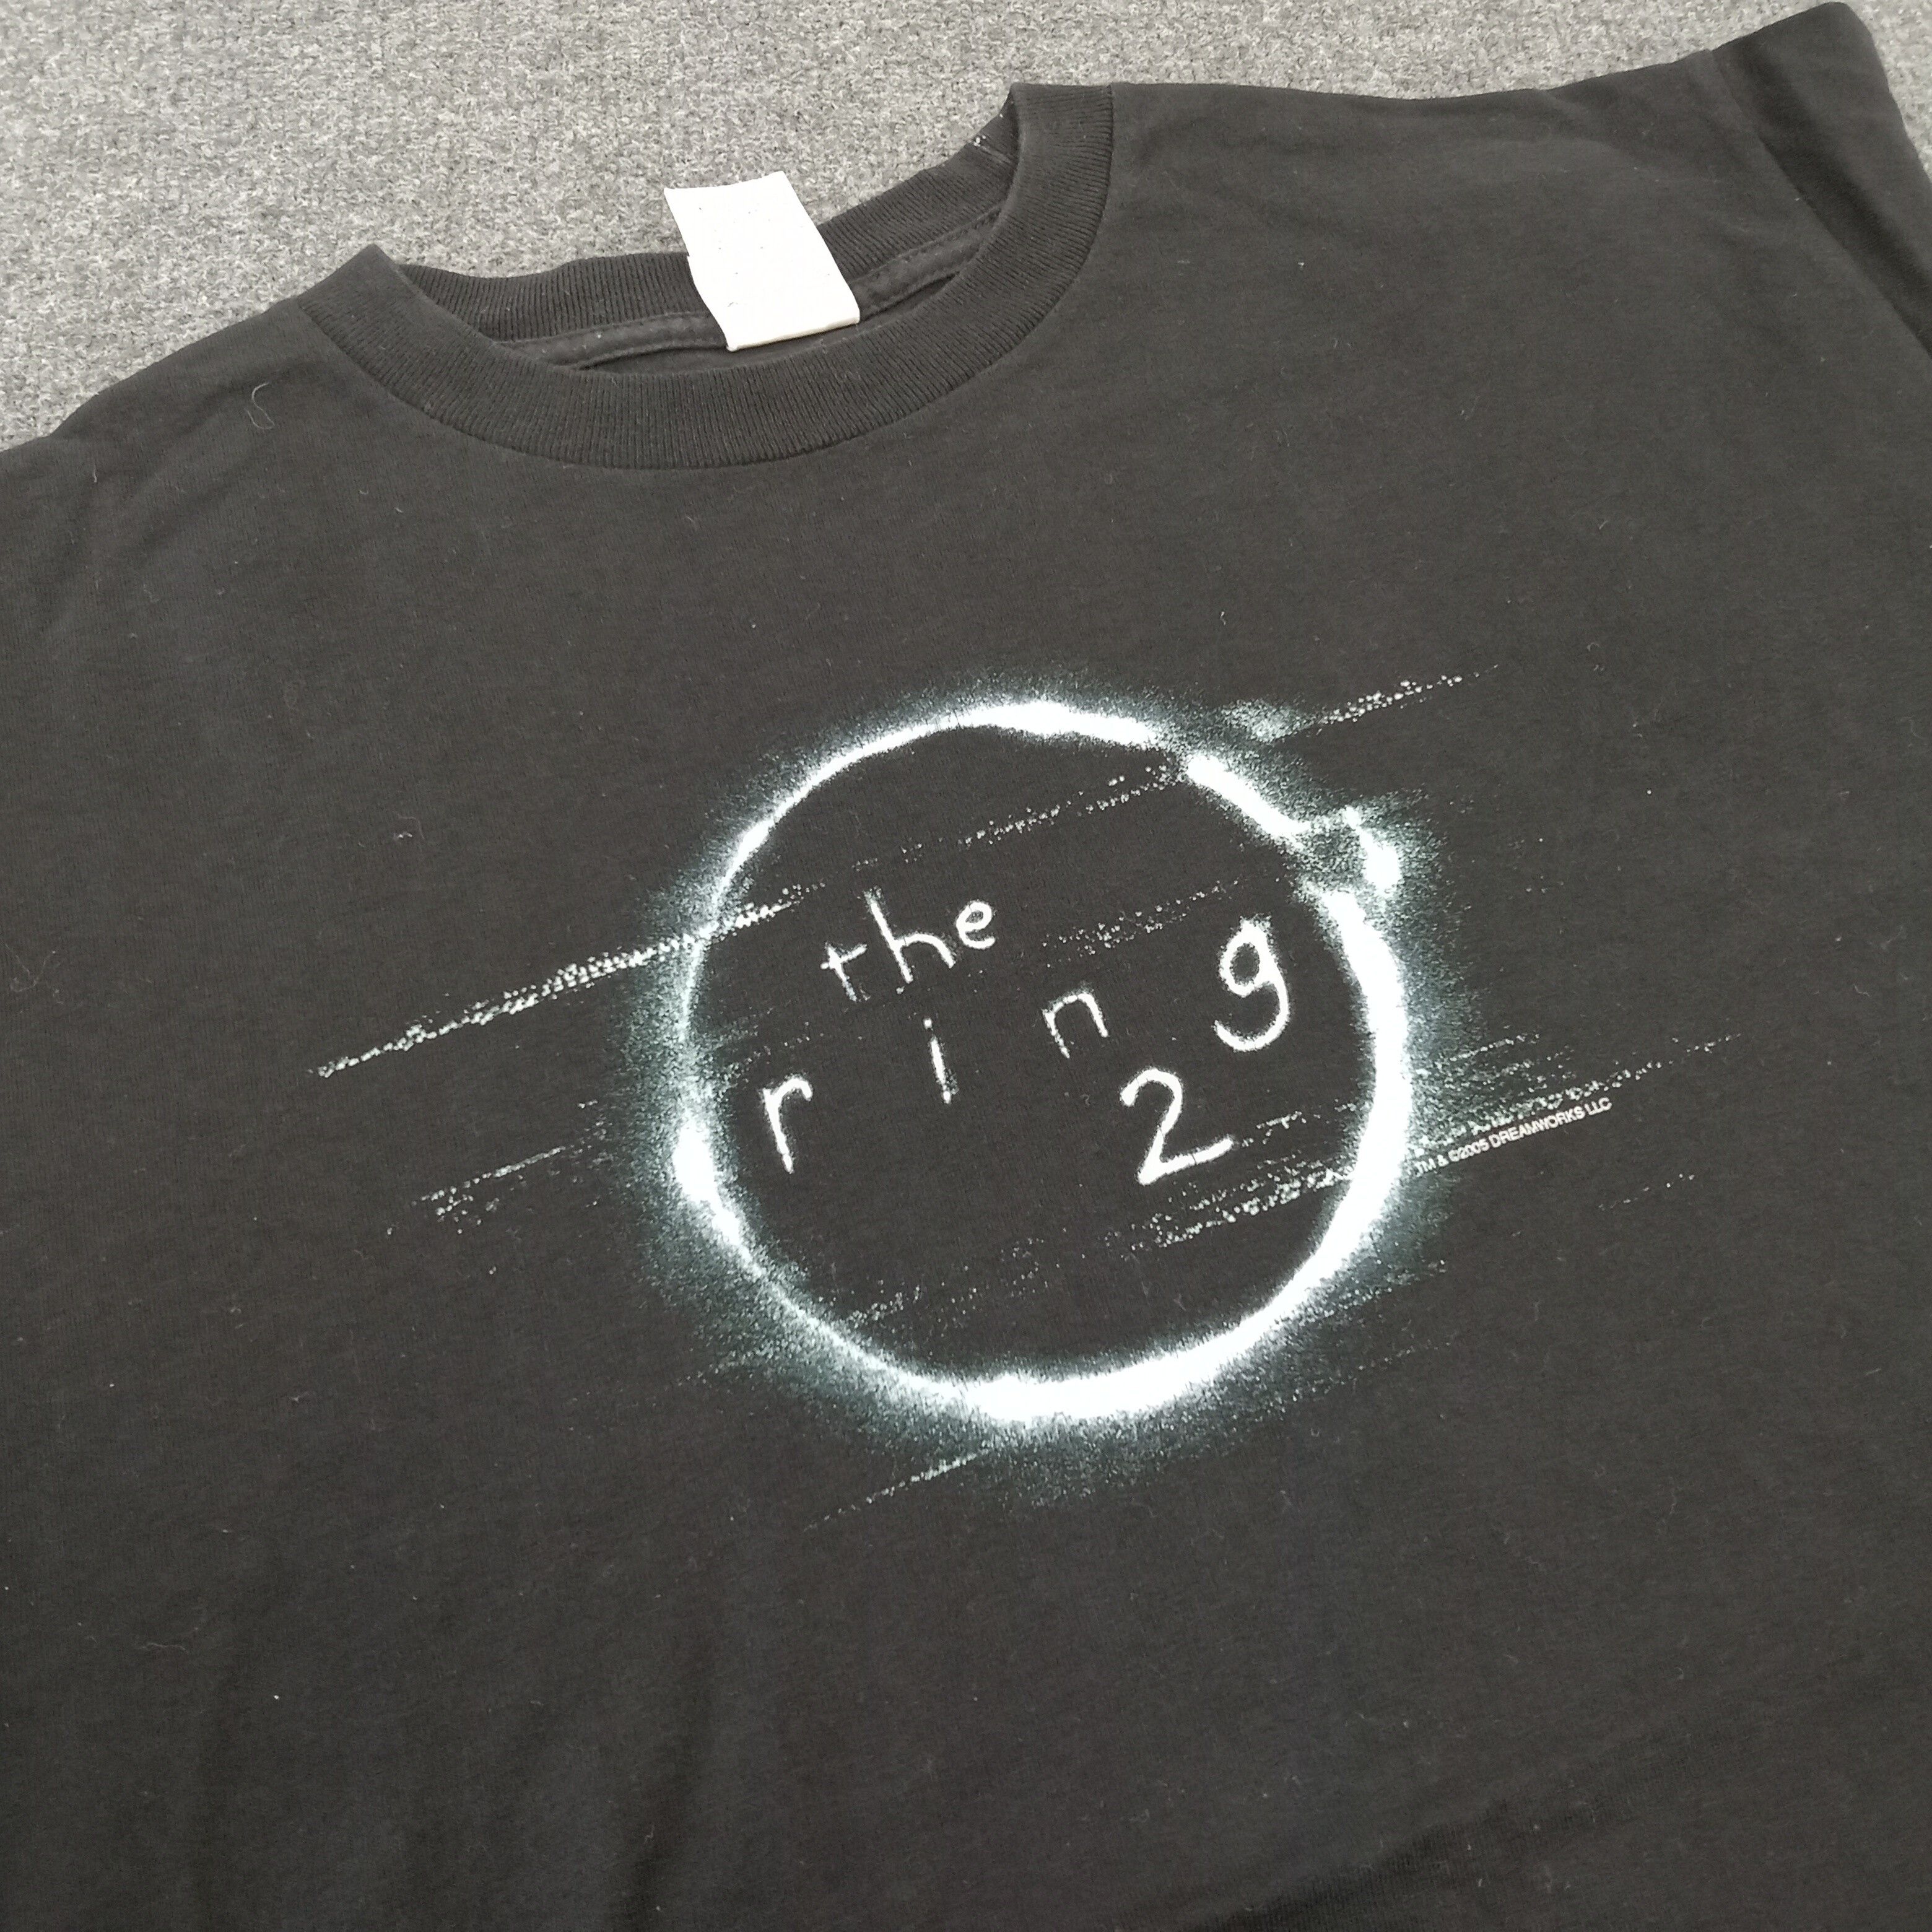 Vintage The Ring 2 Horror Thriller Movie Tshirt Size US M / EU 48-50 / 2 - 2 Preview